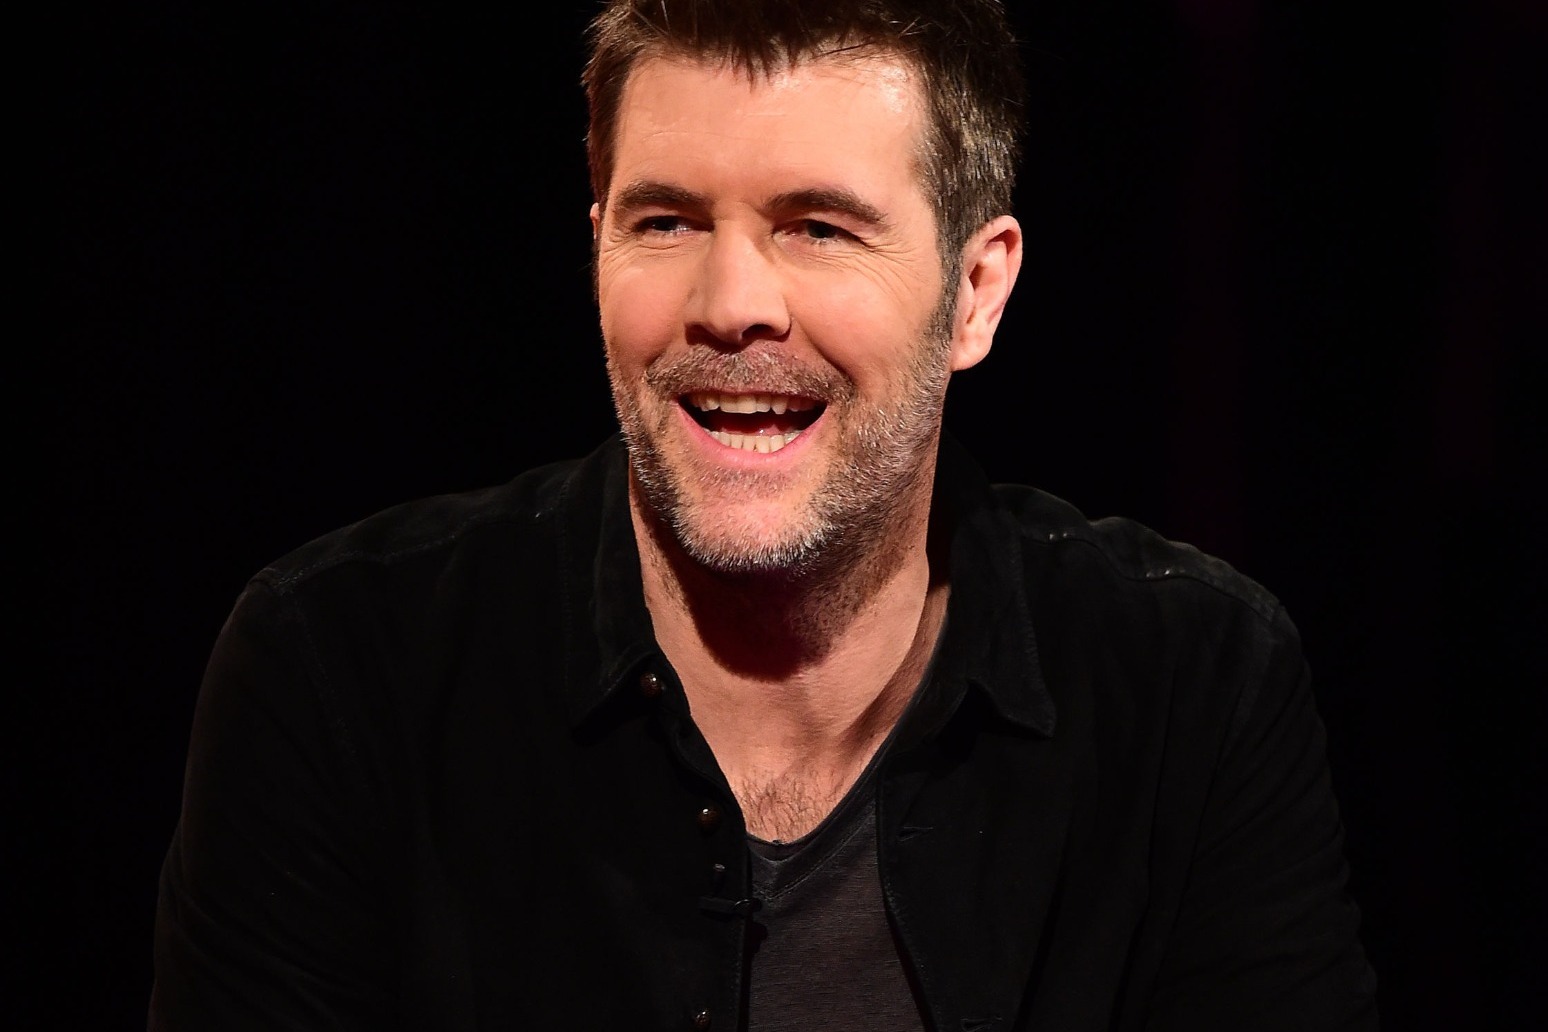 Rhod Gilbert says he is ‘optimistic’ he will come through his cancer diagnosis 